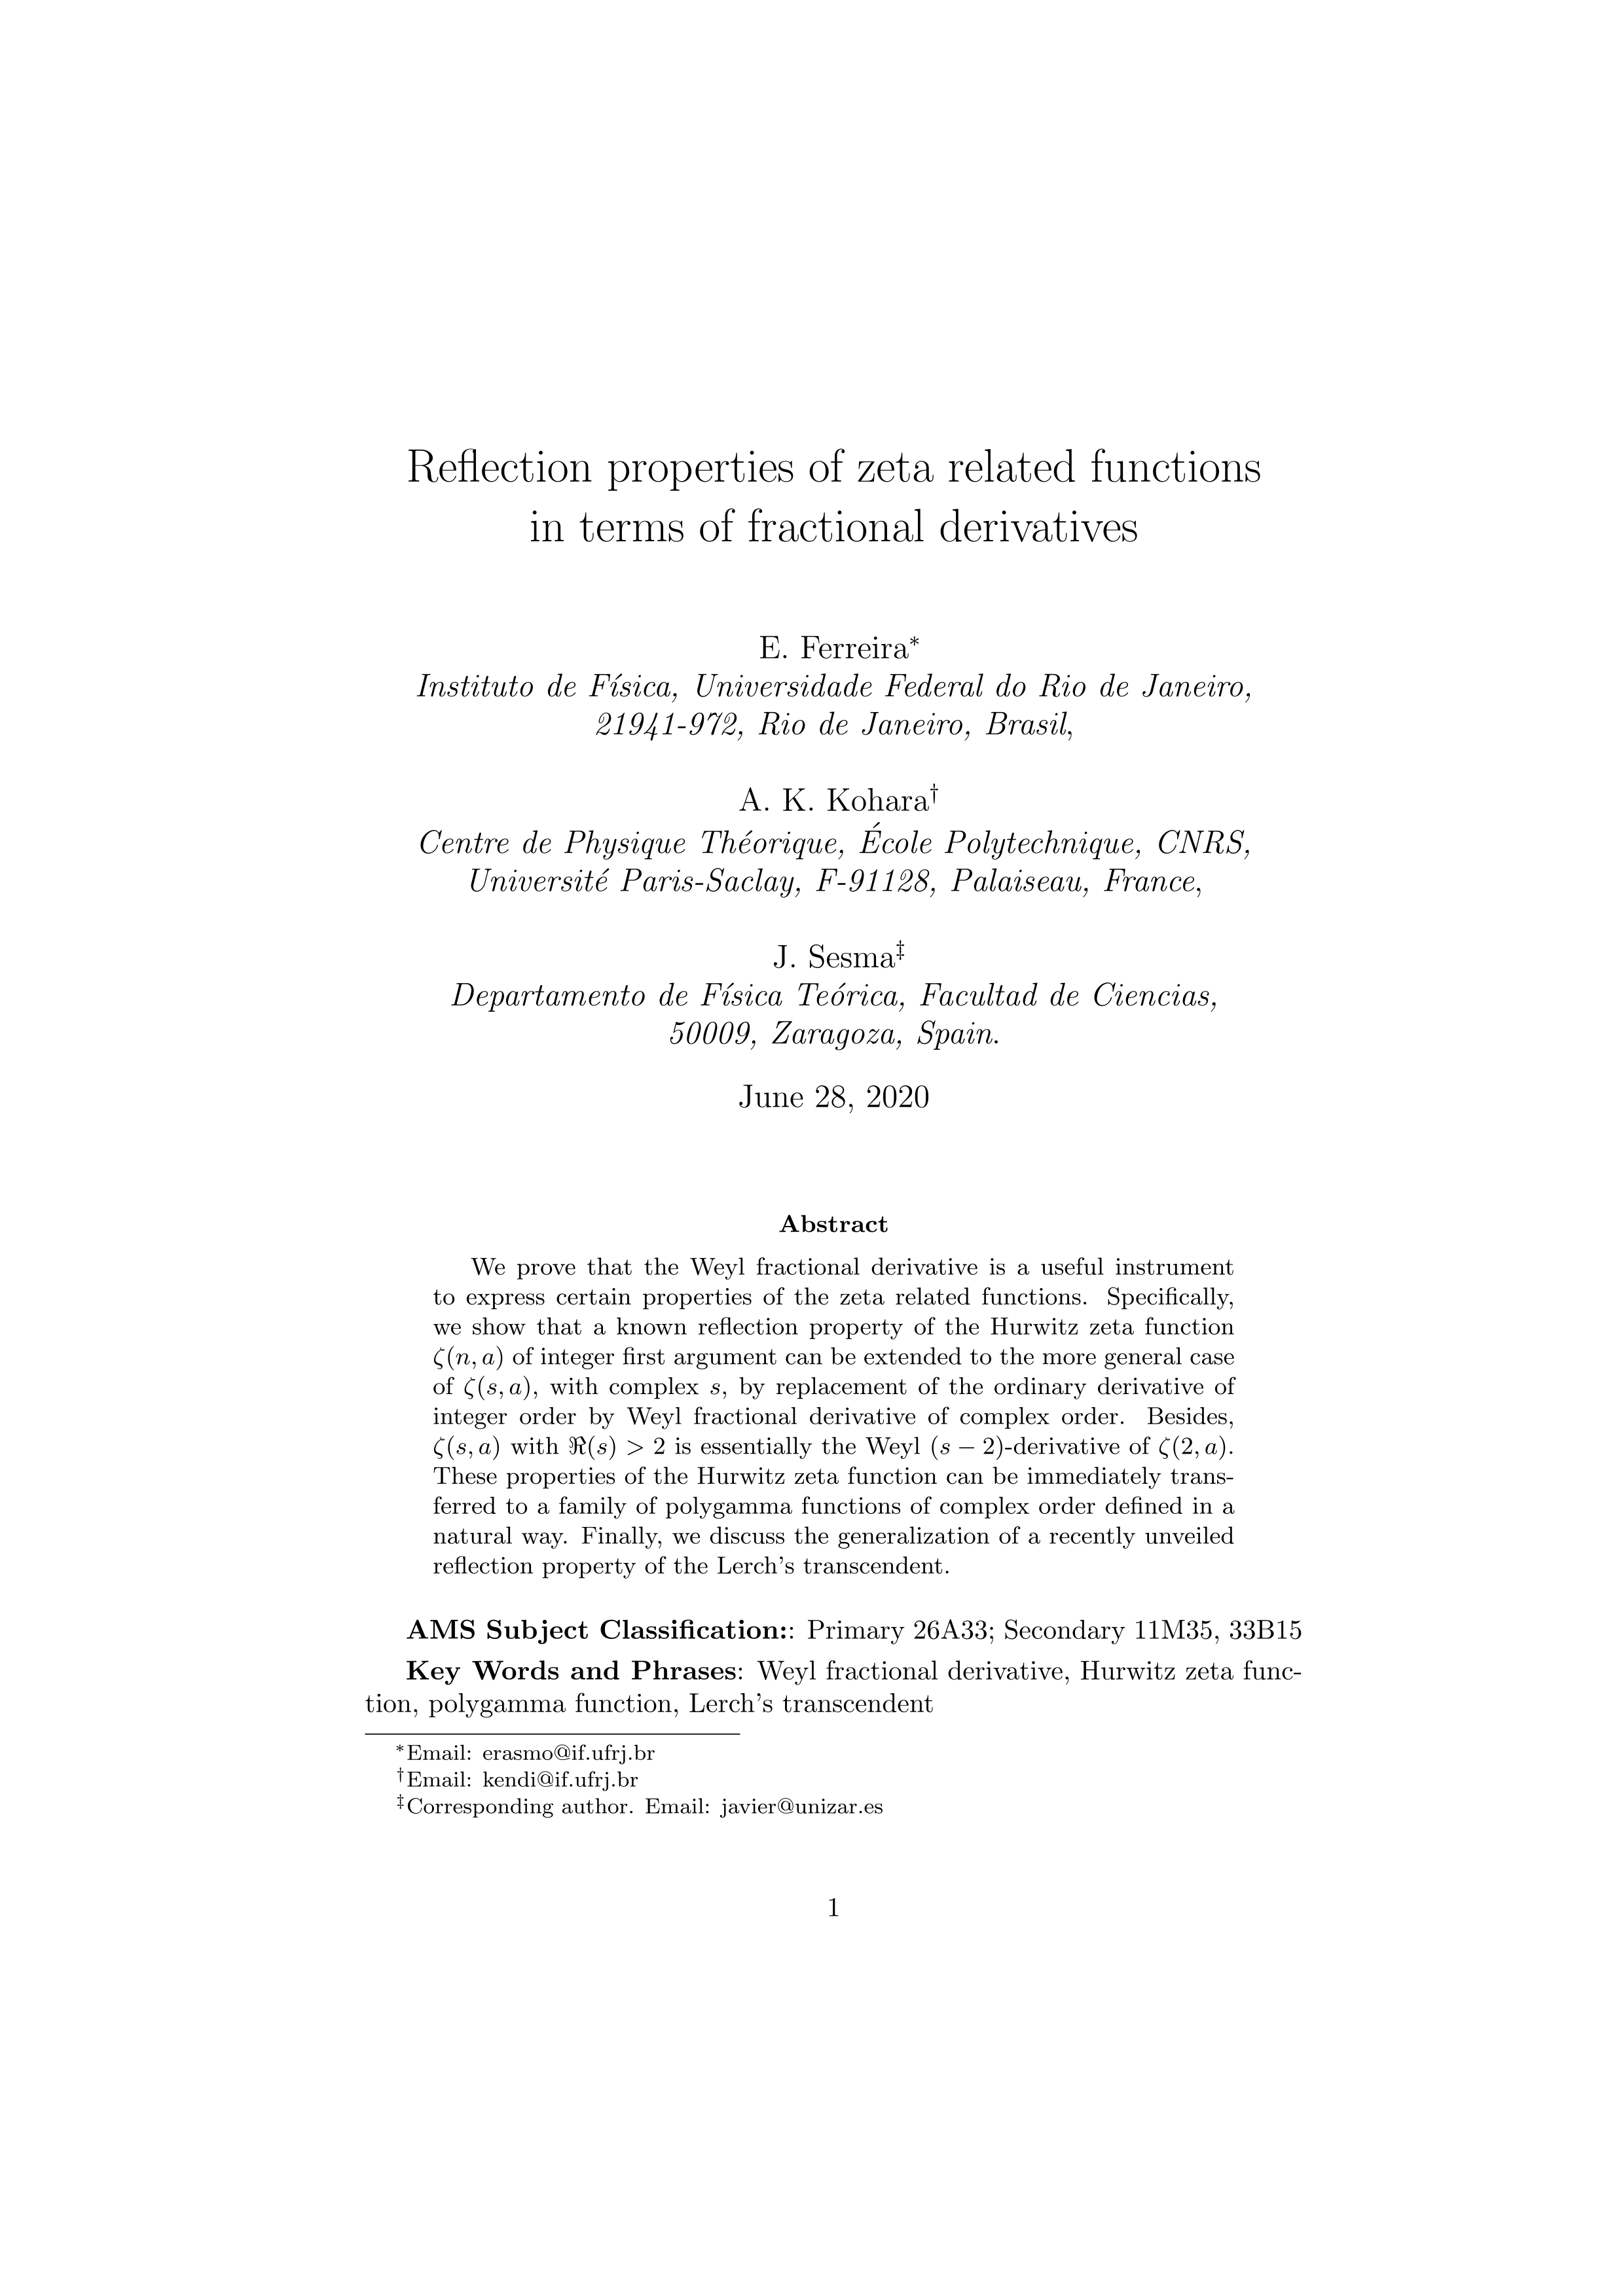 Reflection properties of zeta related functions in terms of fractional derivatives